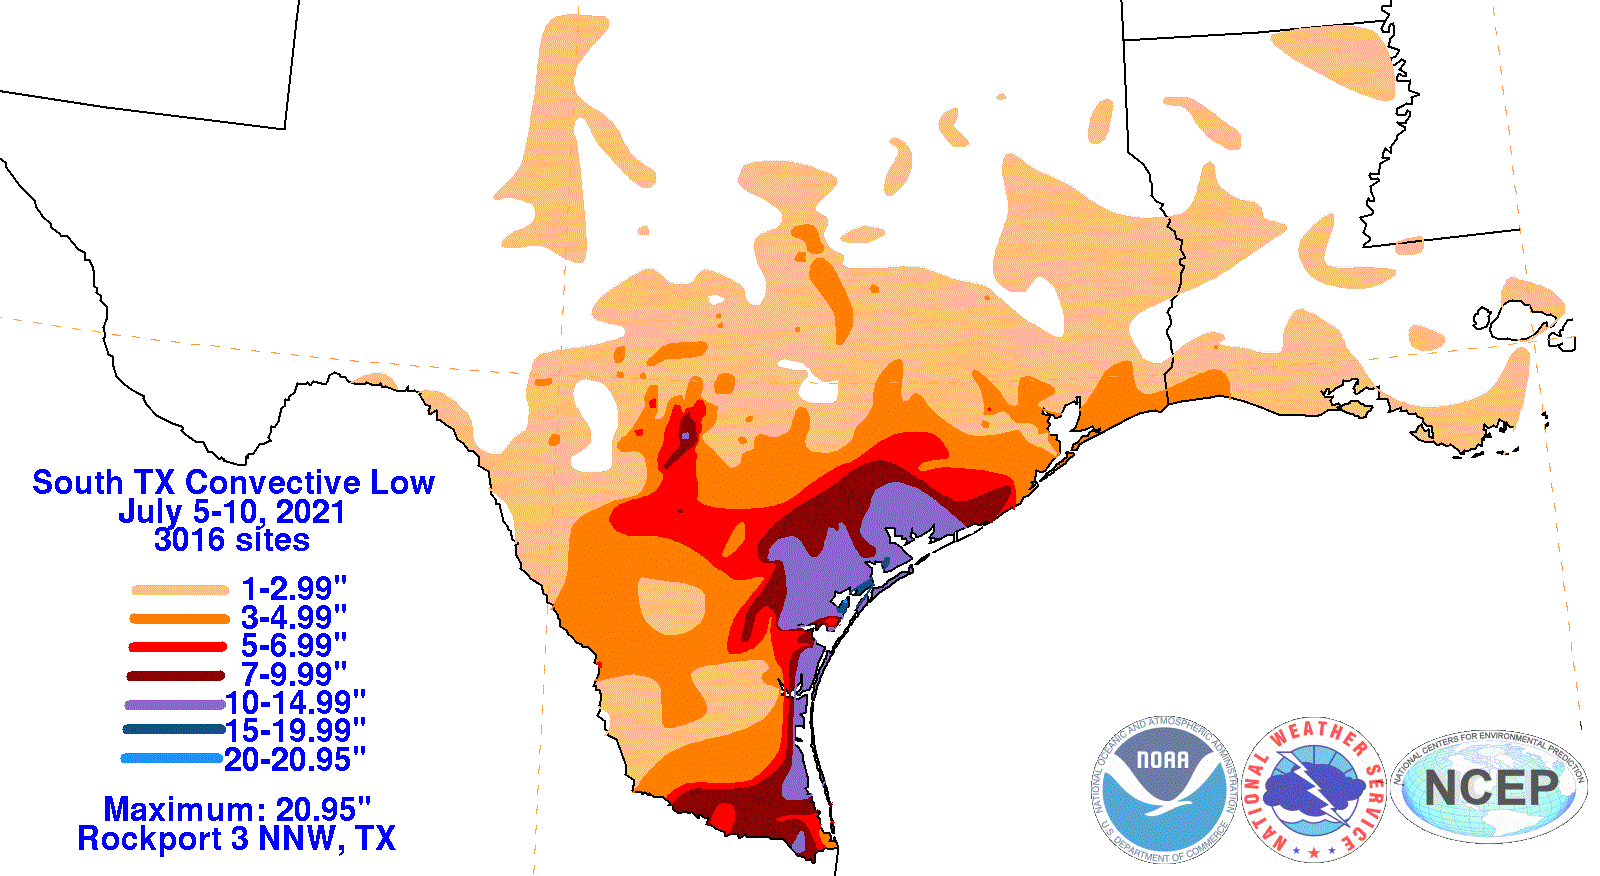 South Texas Convective Low (2021) Rainfall